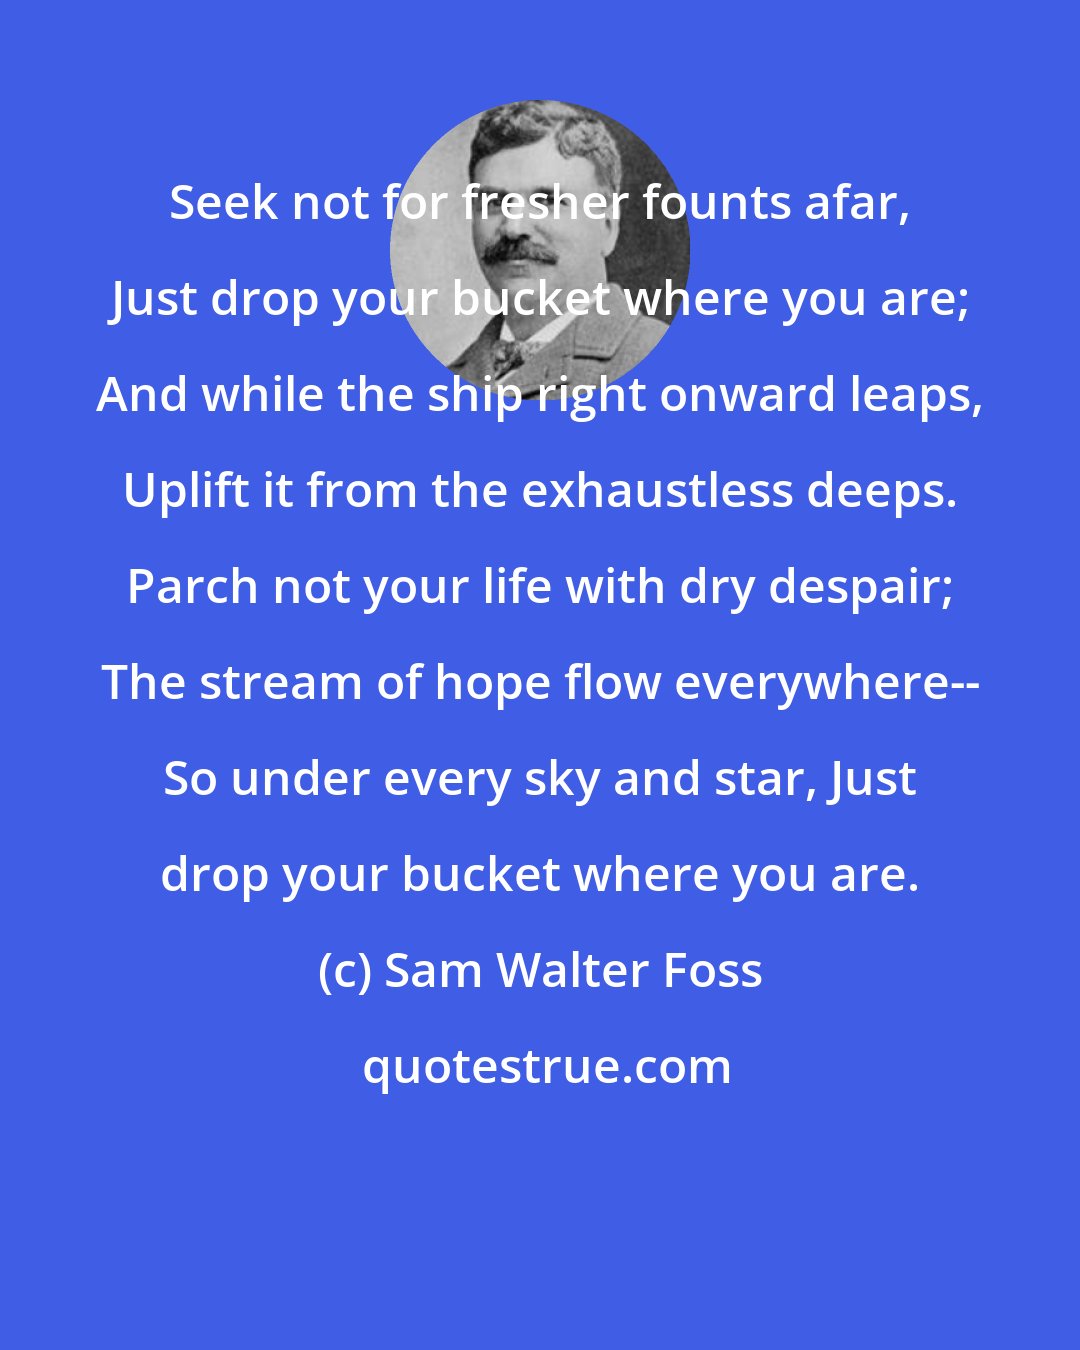 Sam Walter Foss: Seek not for fresher founts afar, Just drop your bucket where you are; And while the ship right onward leaps, Uplift it from the exhaustless deeps. Parch not your life with dry despair; The stream of hope flow everywhere-- So under every sky and star, Just drop your bucket where you are.